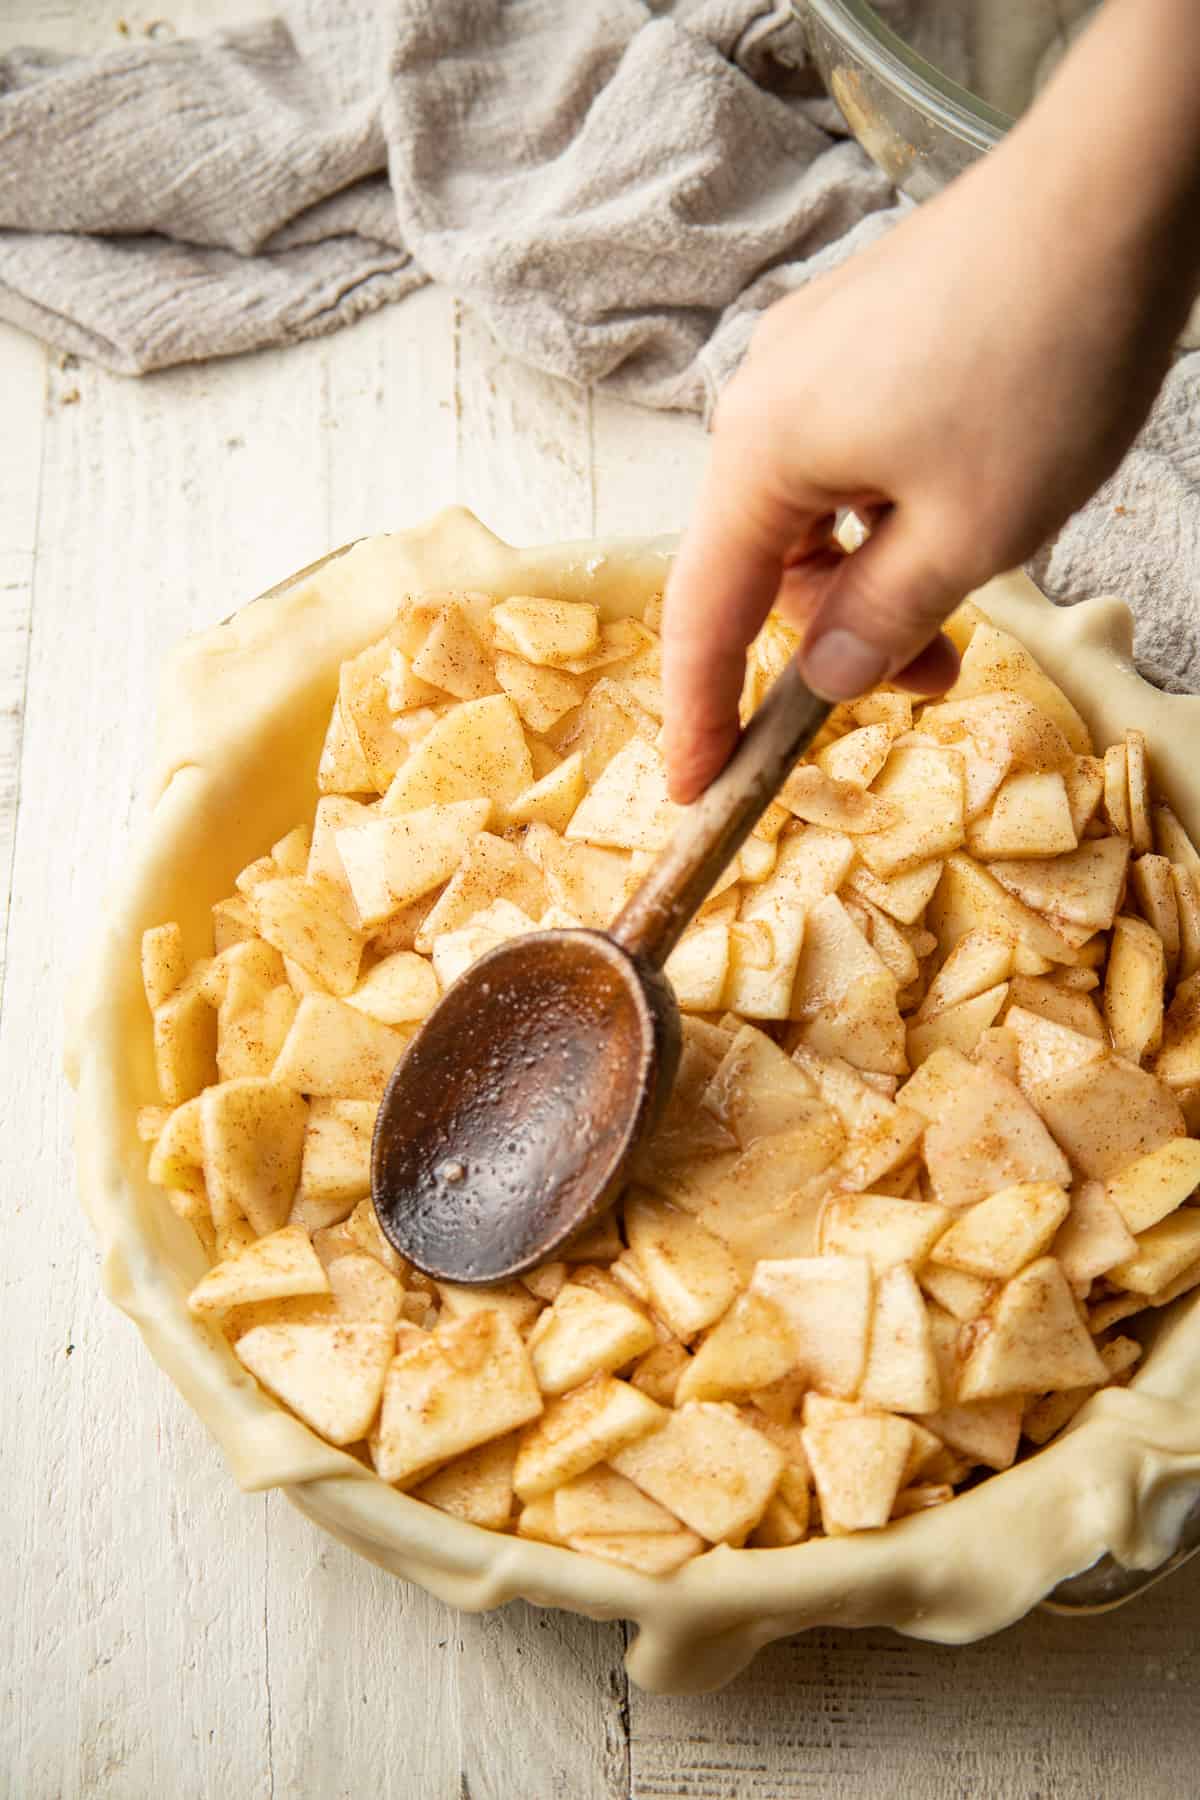 Hand using a wooden spoon to pack vegan apple pie filling into a crust.